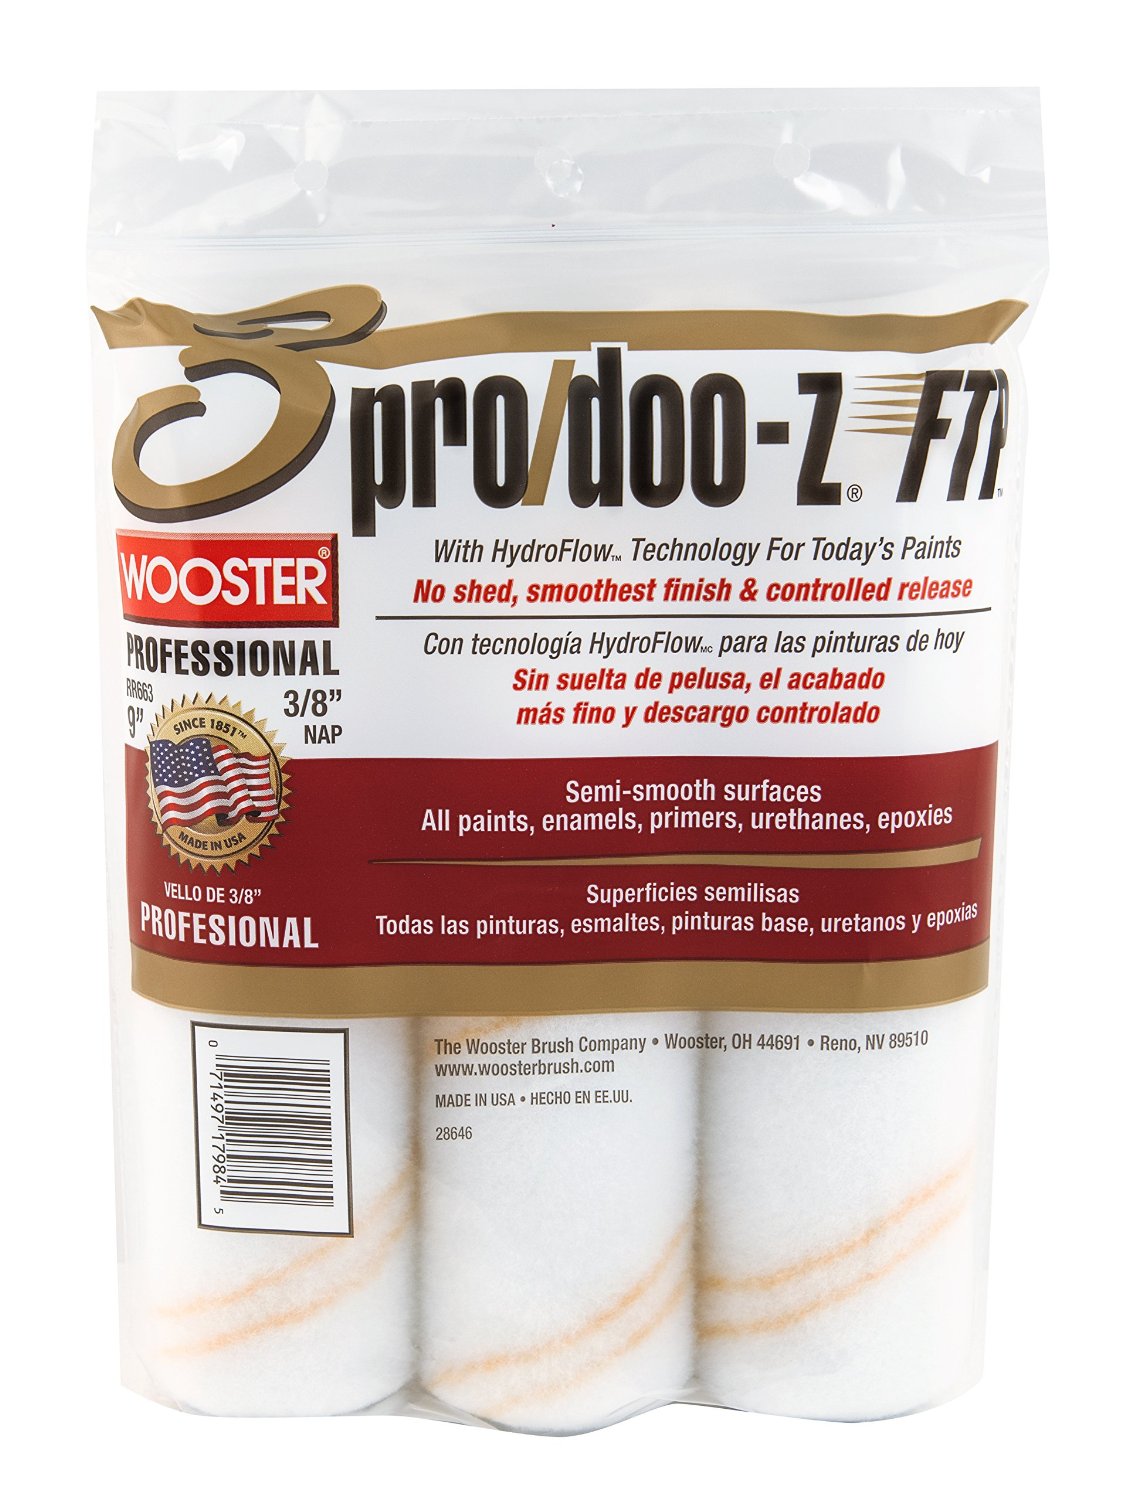 Wooster RR663-9 Pro/Doo-Z FTP Roller Cover, 9", Package Of 3